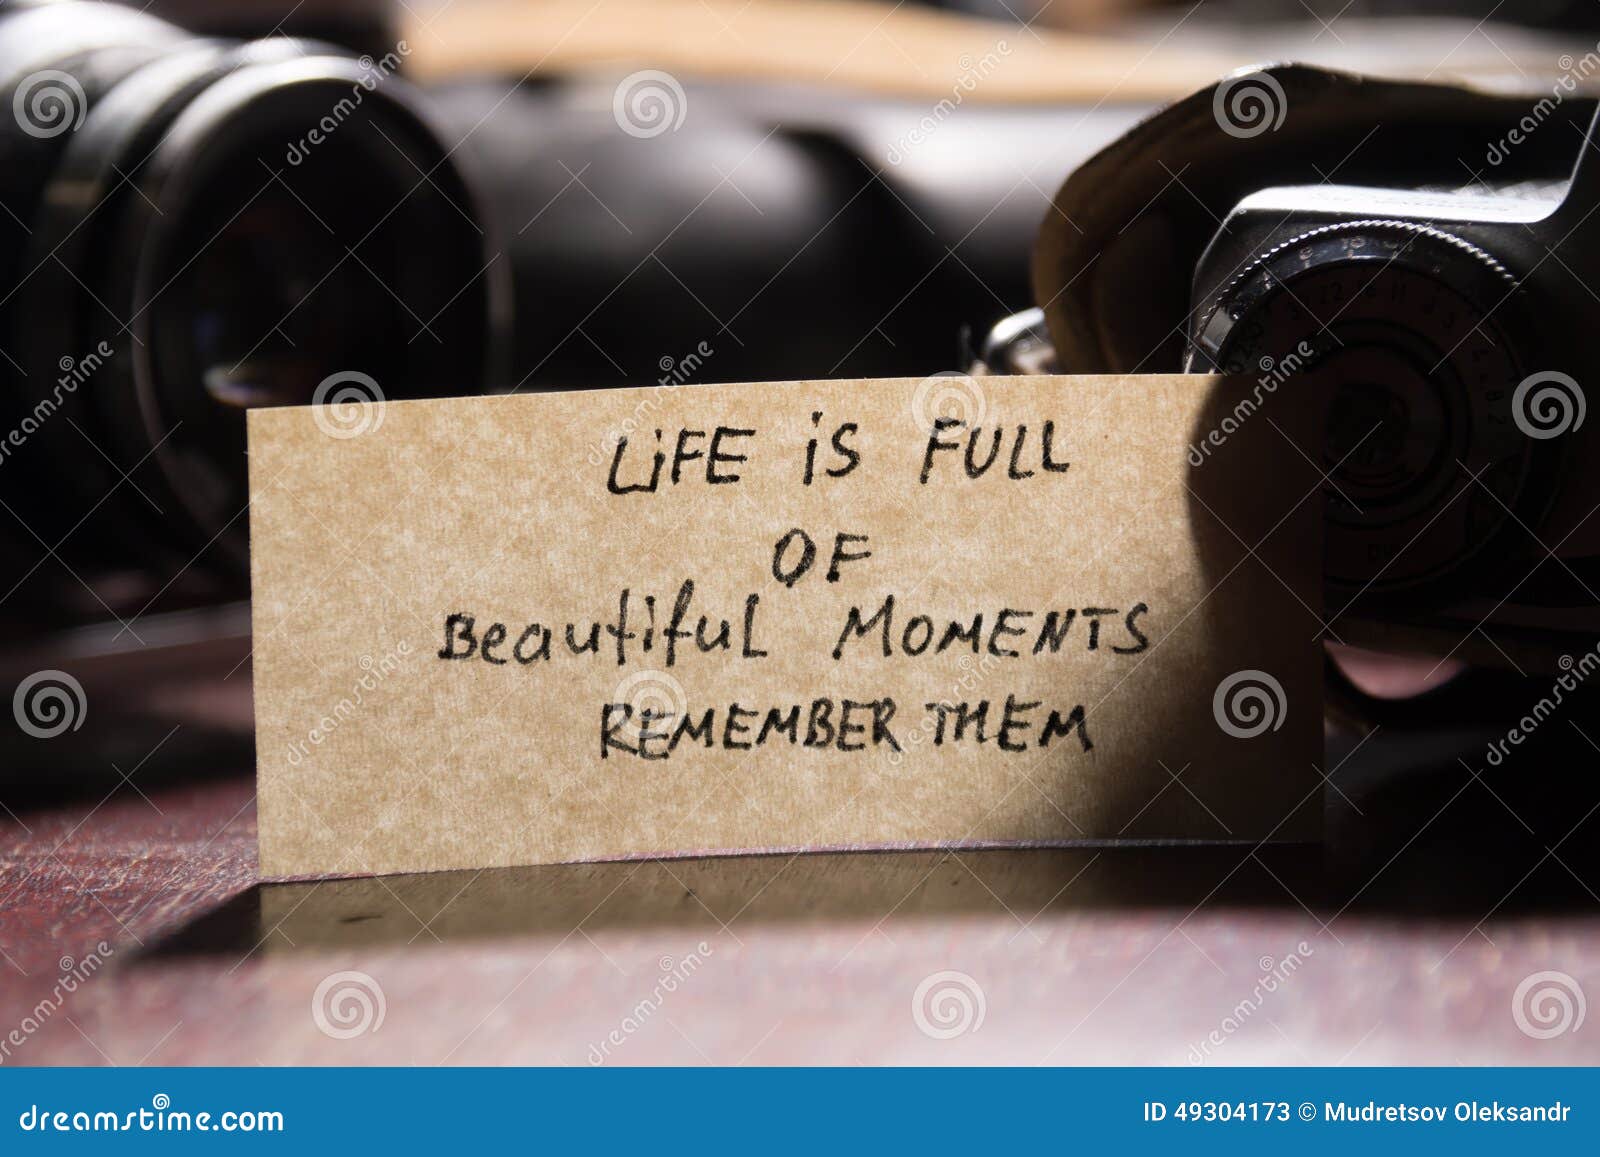 We remember them. A Life is a moment картинки. I remember beautiful мгновение. Life is a collection of moments. Remember the best moments of Life эскизы.